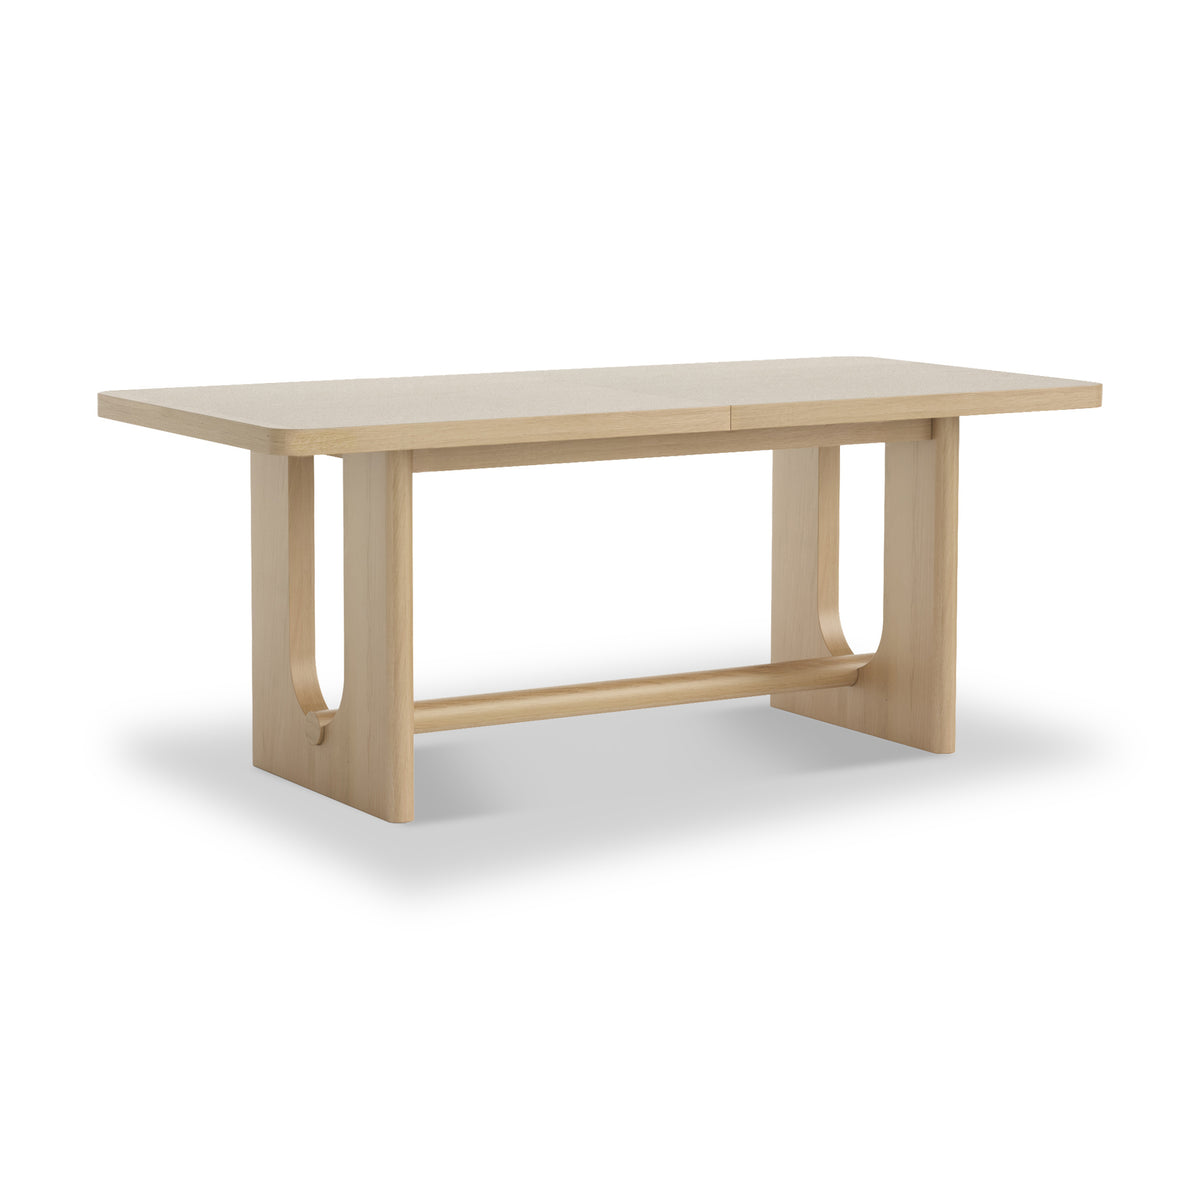 Whitstone Oak Large Extending Dining Table from Roseland Furniture